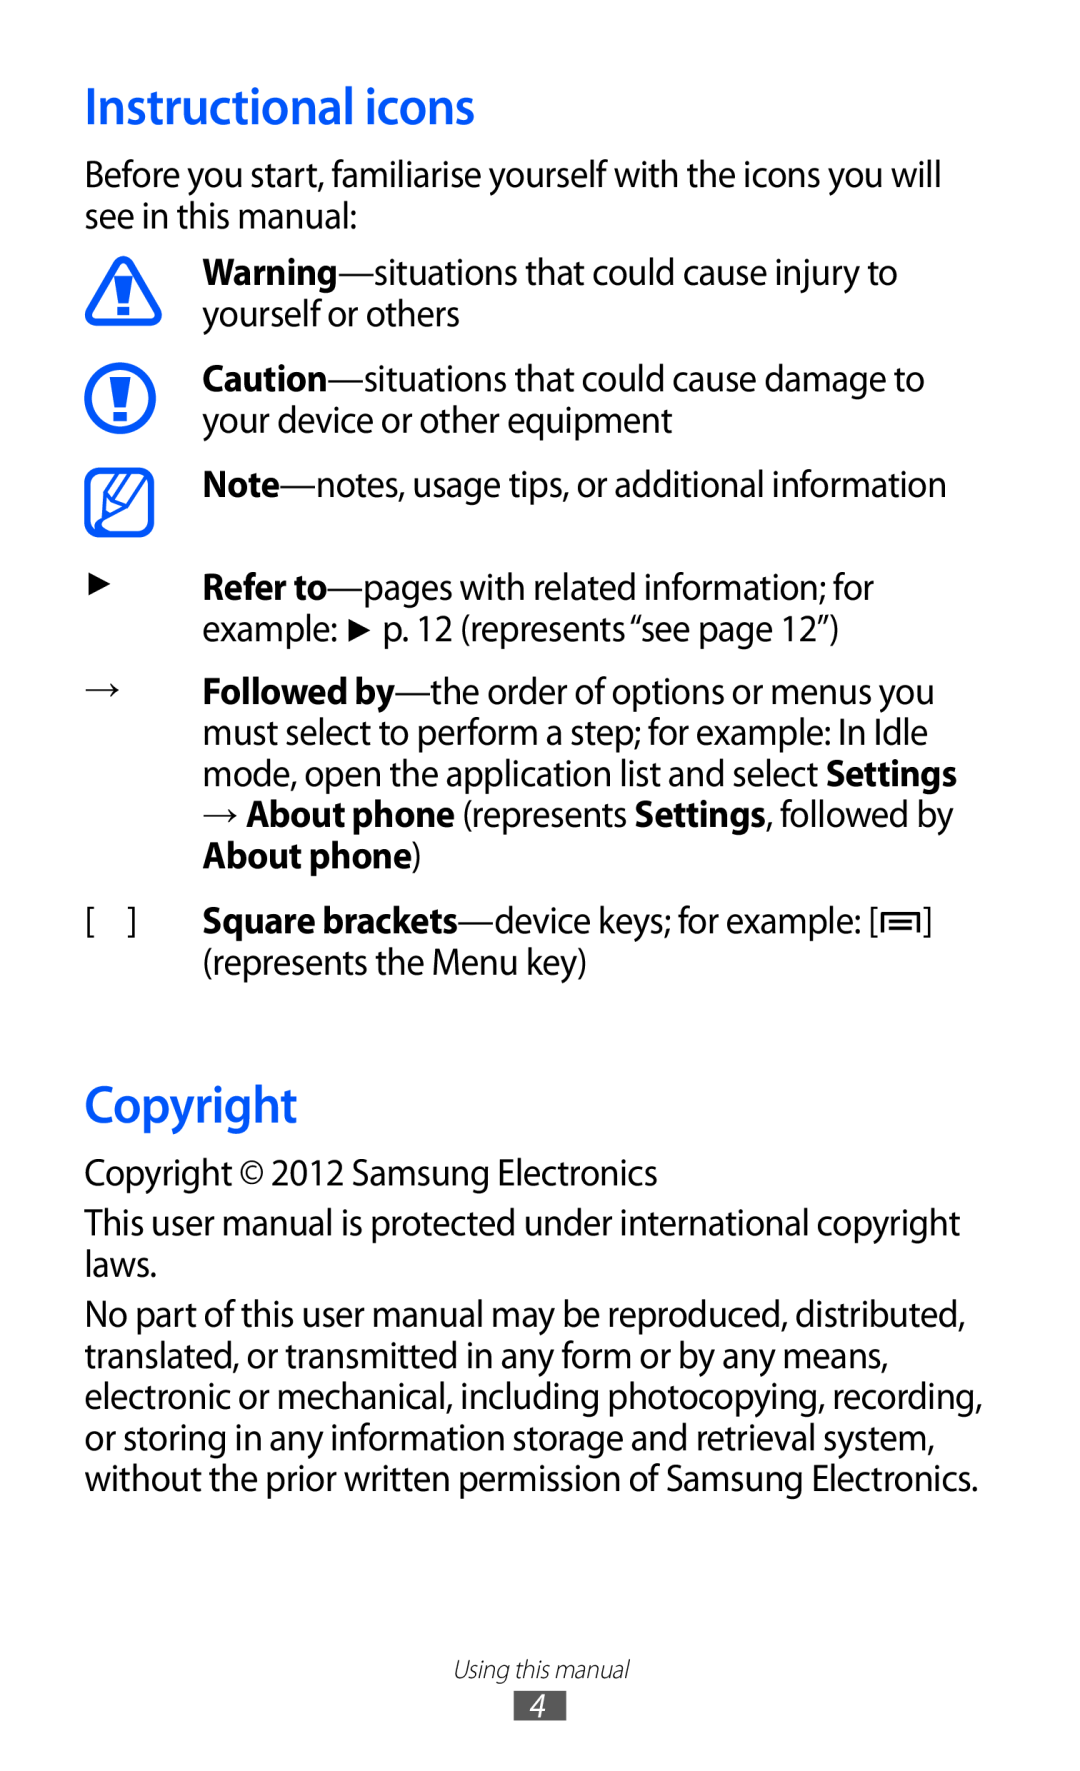 Samsung GT-I9070 user manual Instructional icons, Copyright 